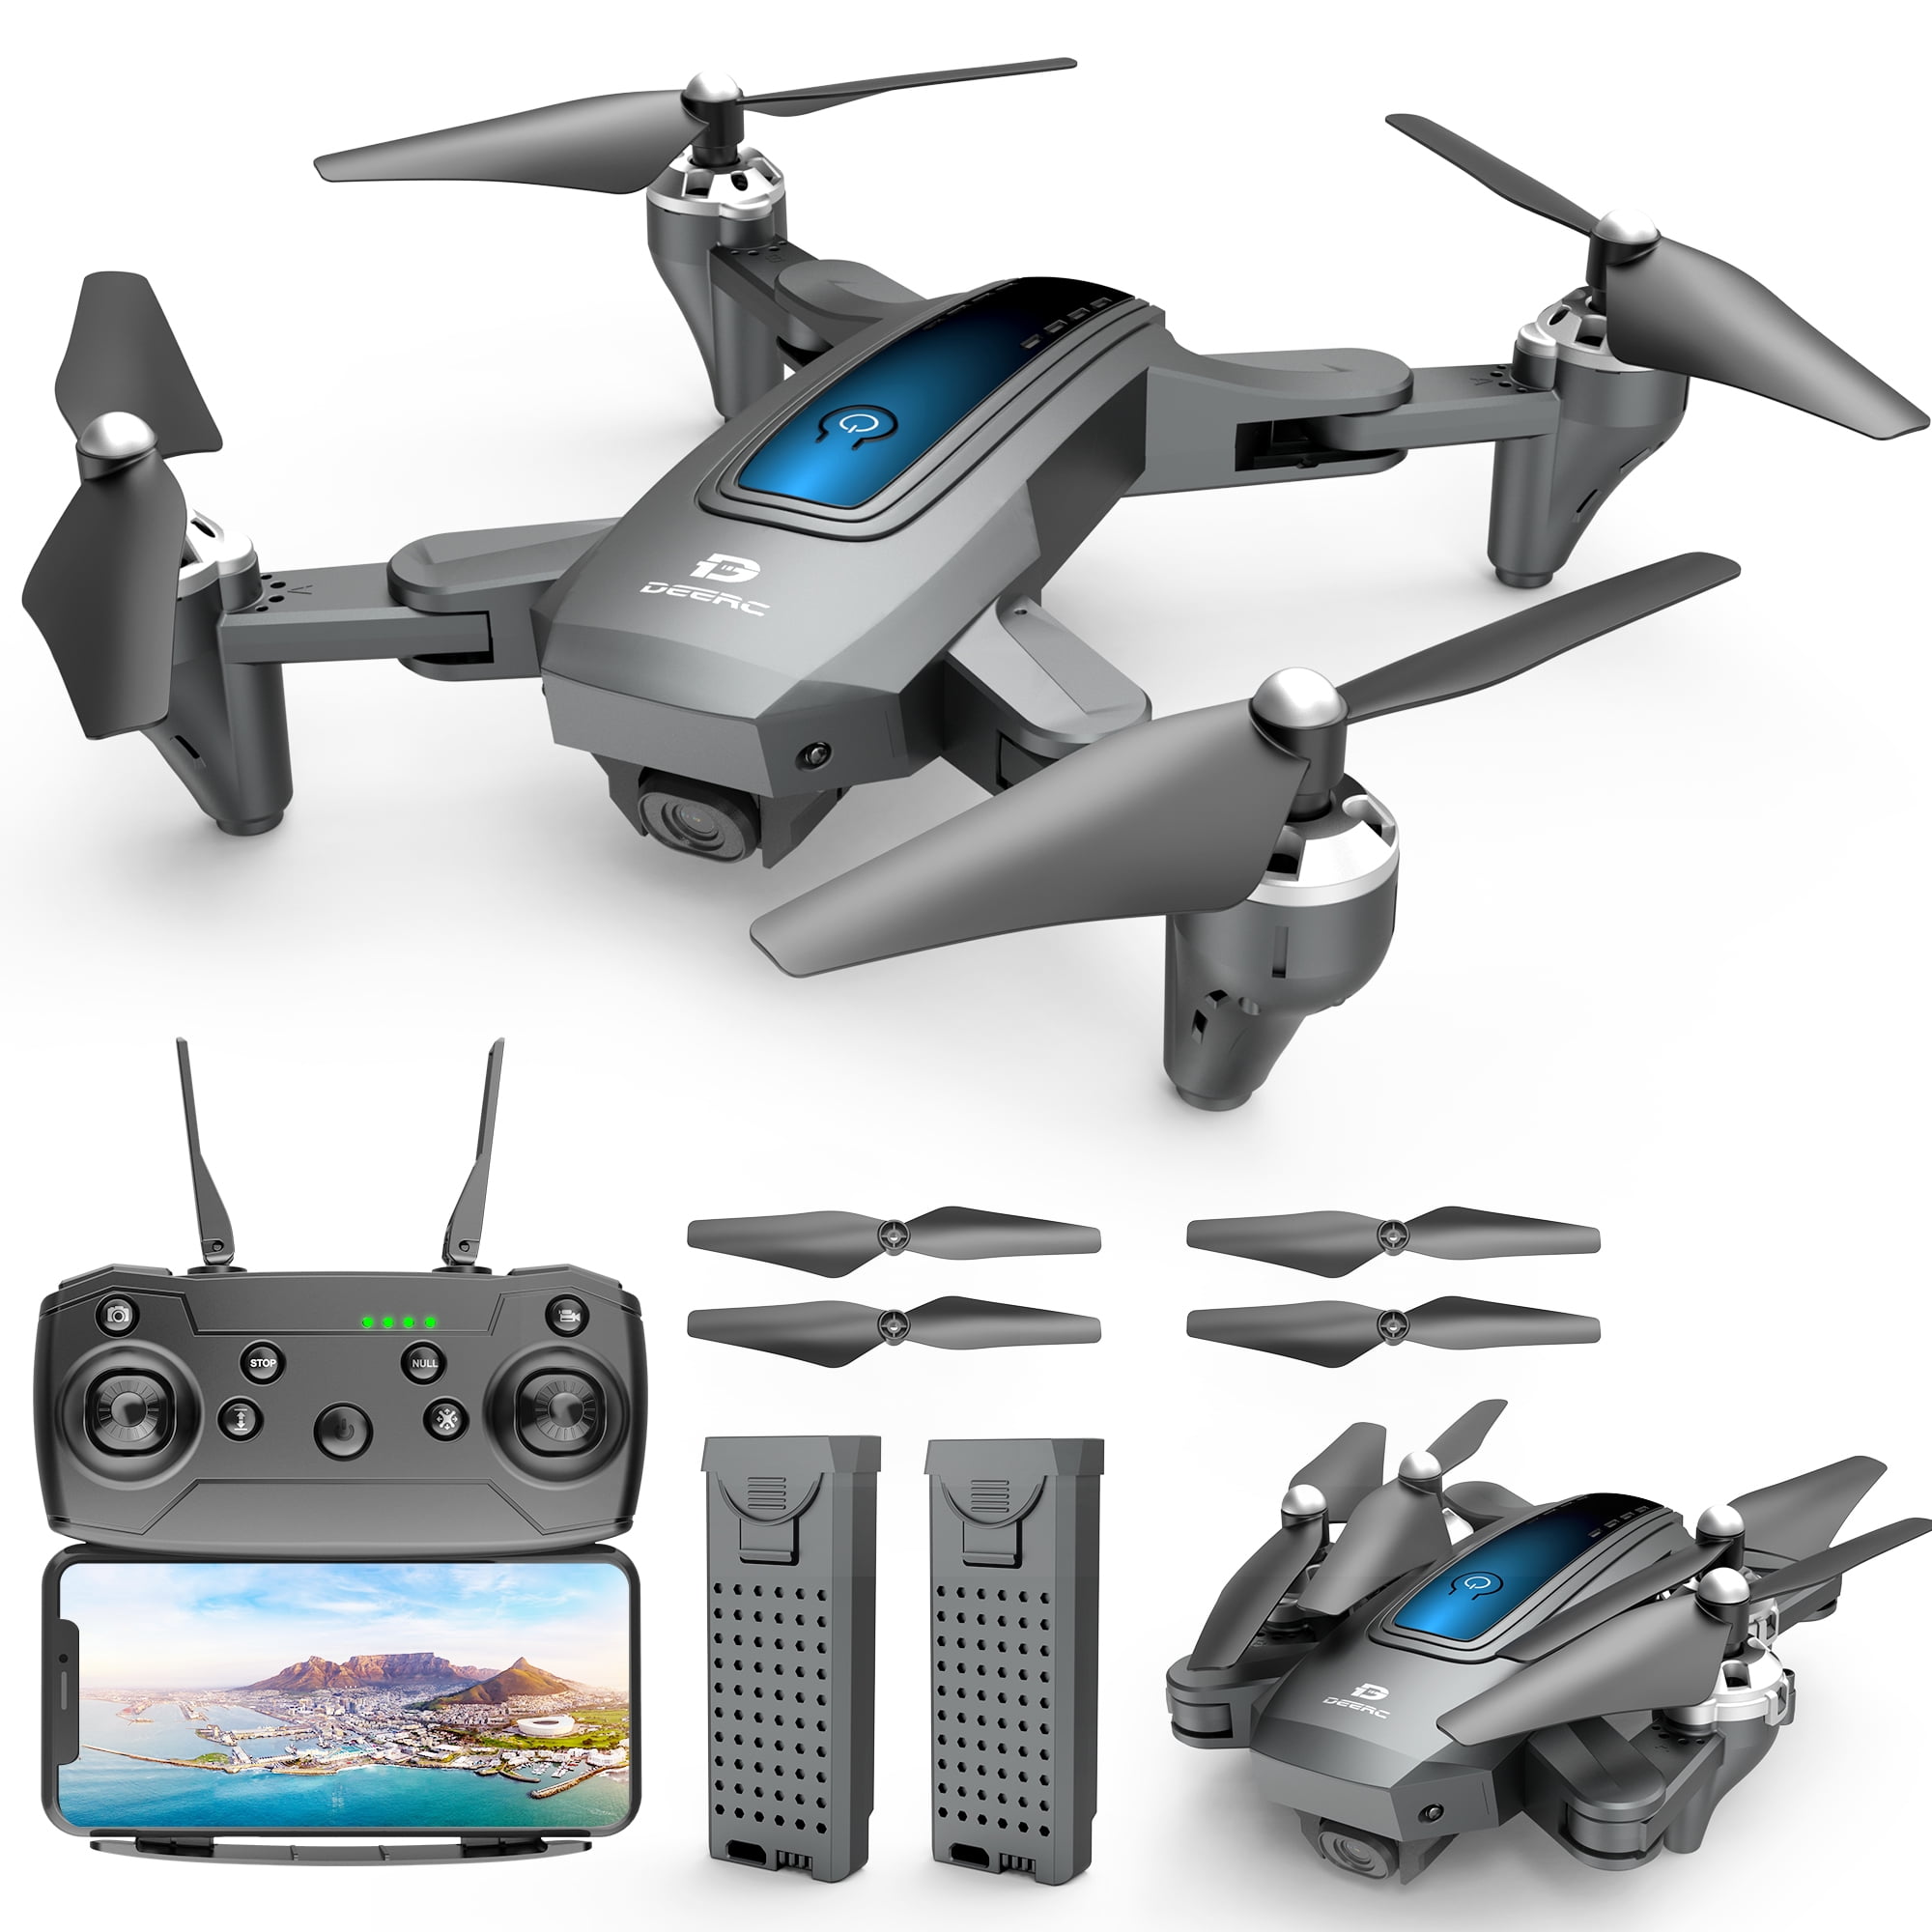 Deerc D10 Drone with Camera for Adults, 1080P FHD FPV Live Video, Gravity  Control, Altitude Hold, Headless Mode, Waypoints Functions, with Carrying